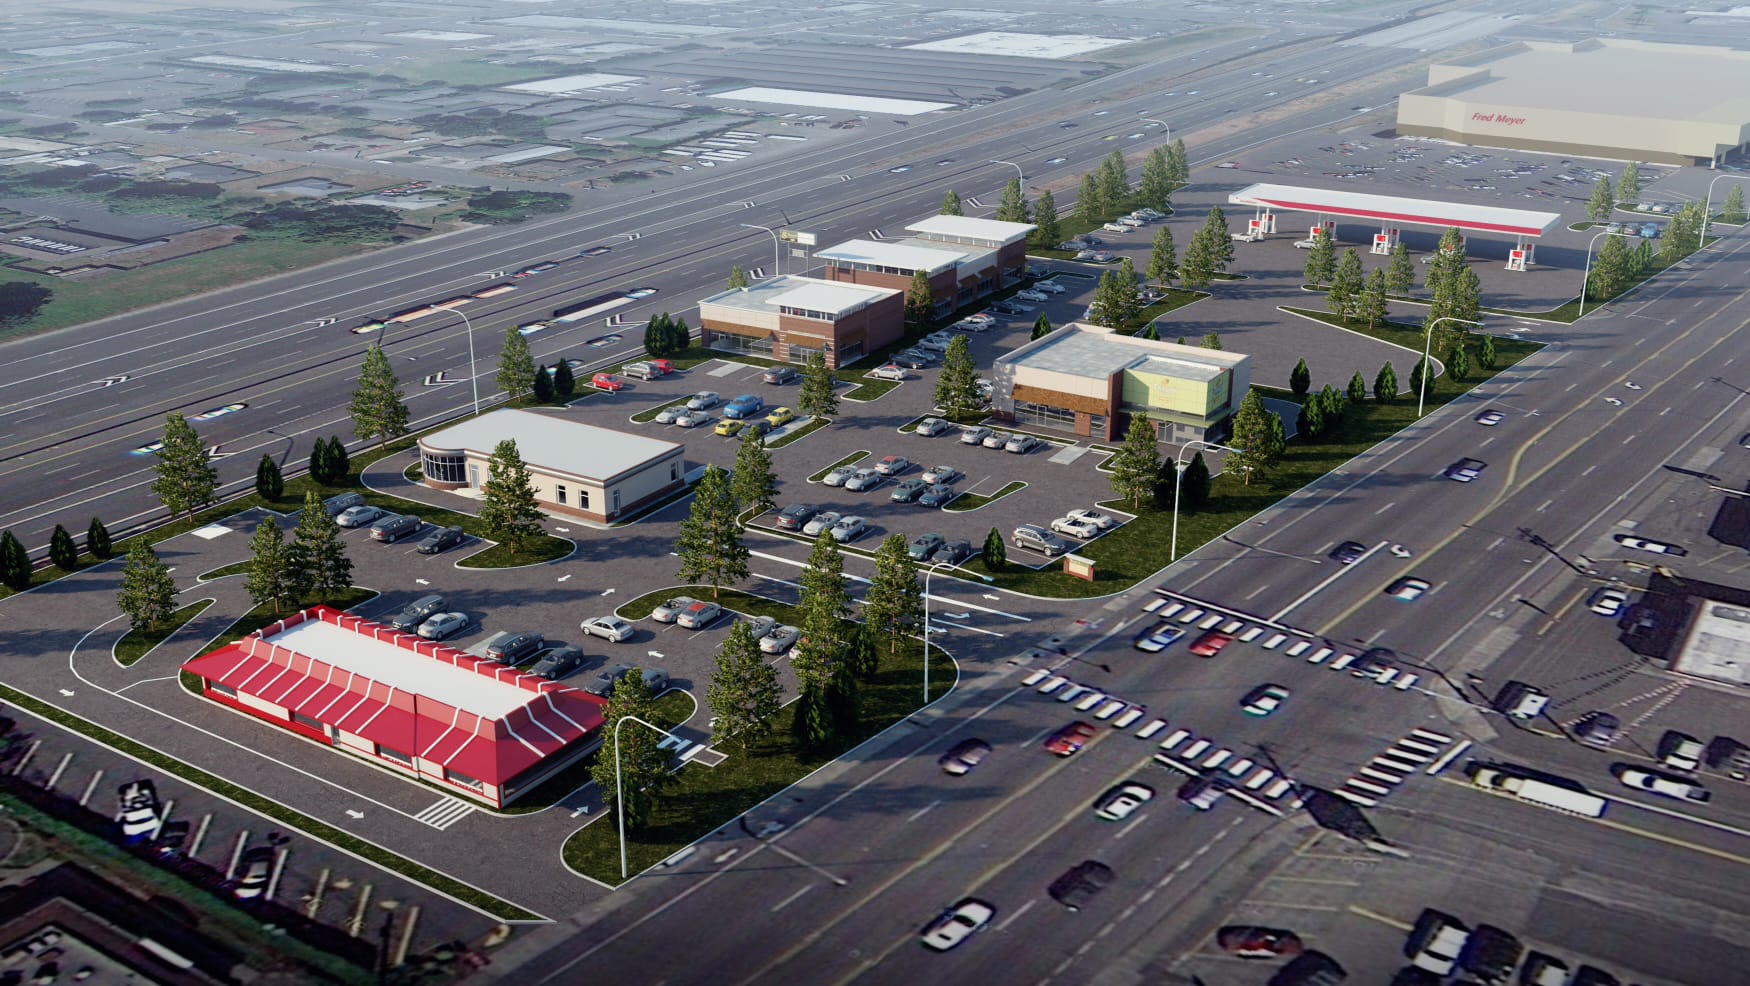 An artist's rendering shows the vision of a planned redevelopment of about 4.4 acres on the west side of Northeast Highway 99. The property now includes a McDonald's, the Steakburger restaurant and its miniature golf course and a building now occupied by the Salvation Army, but owned by Fred Meyer, all of which will be demolished.